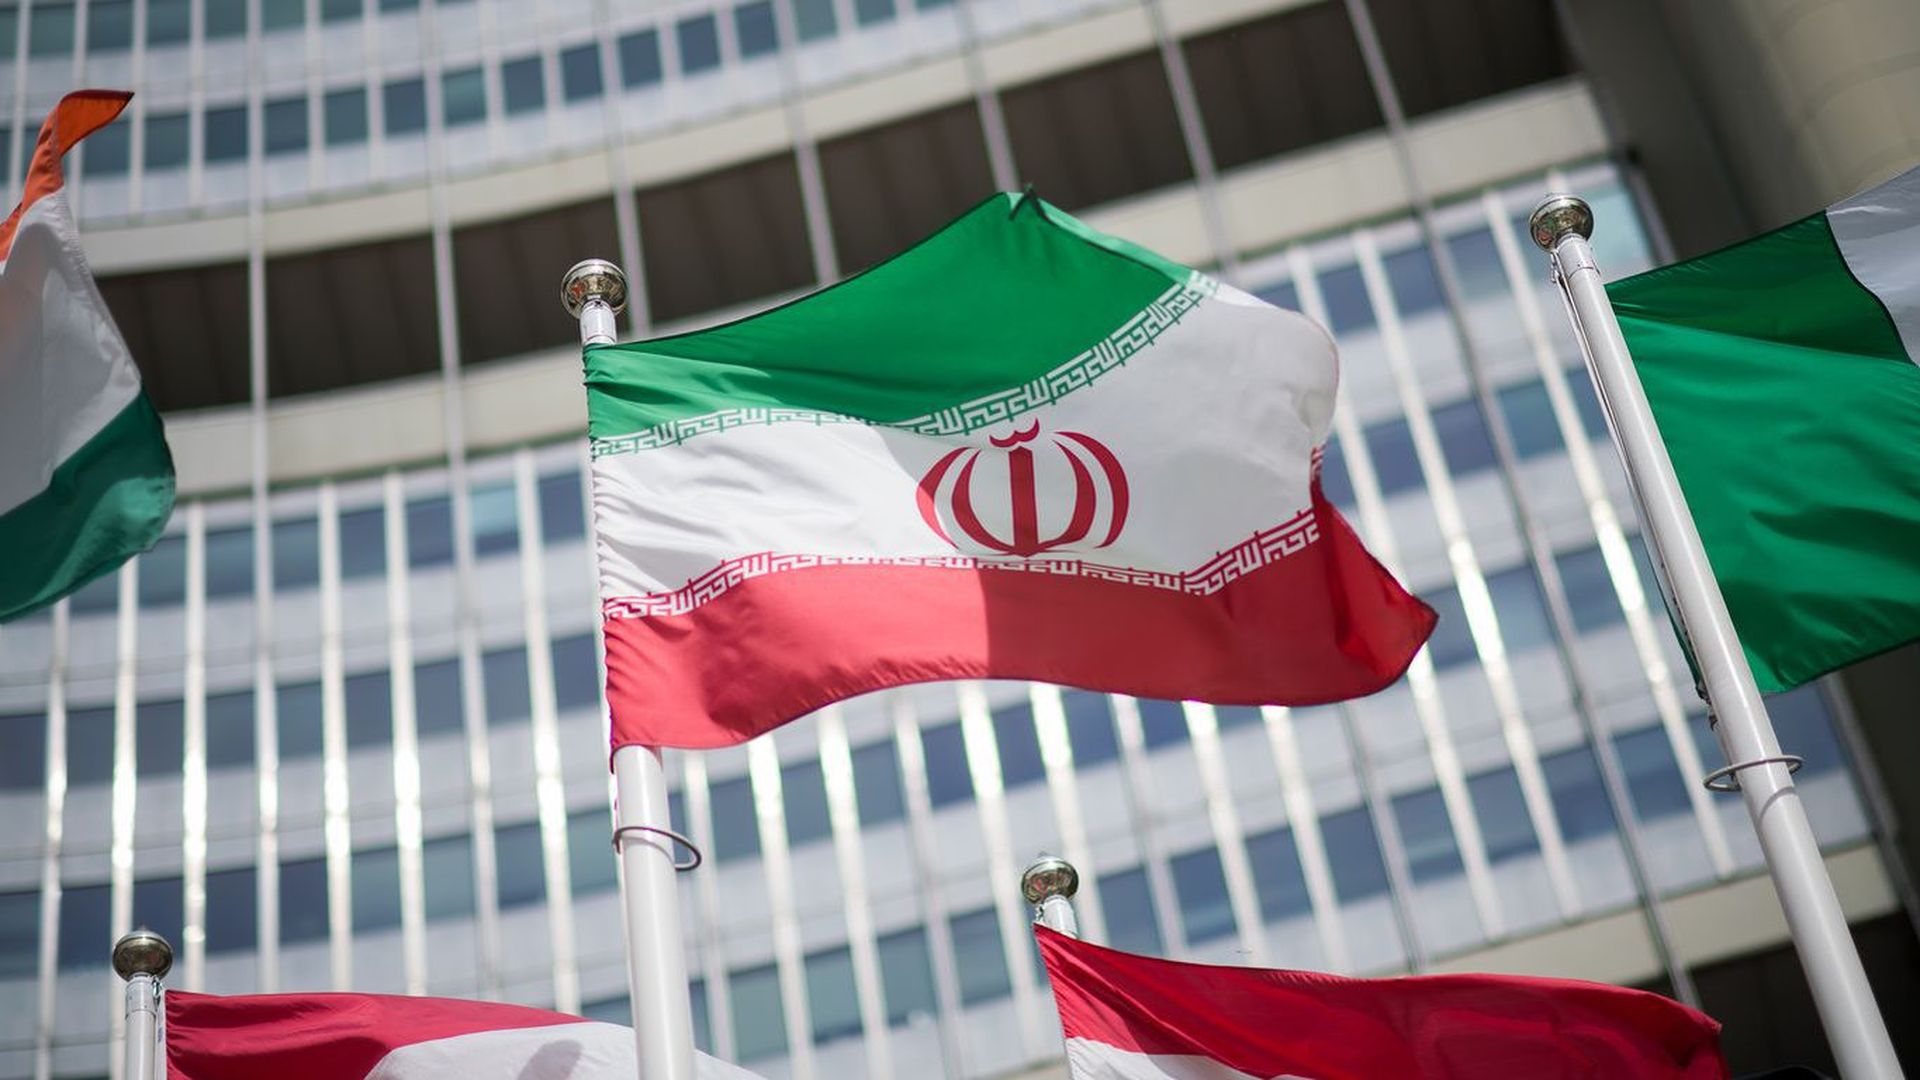 The flag of Iran is seen in front of the International Atomic Energy Agency headquarters. Photo: Michael Gruber/Getty Images